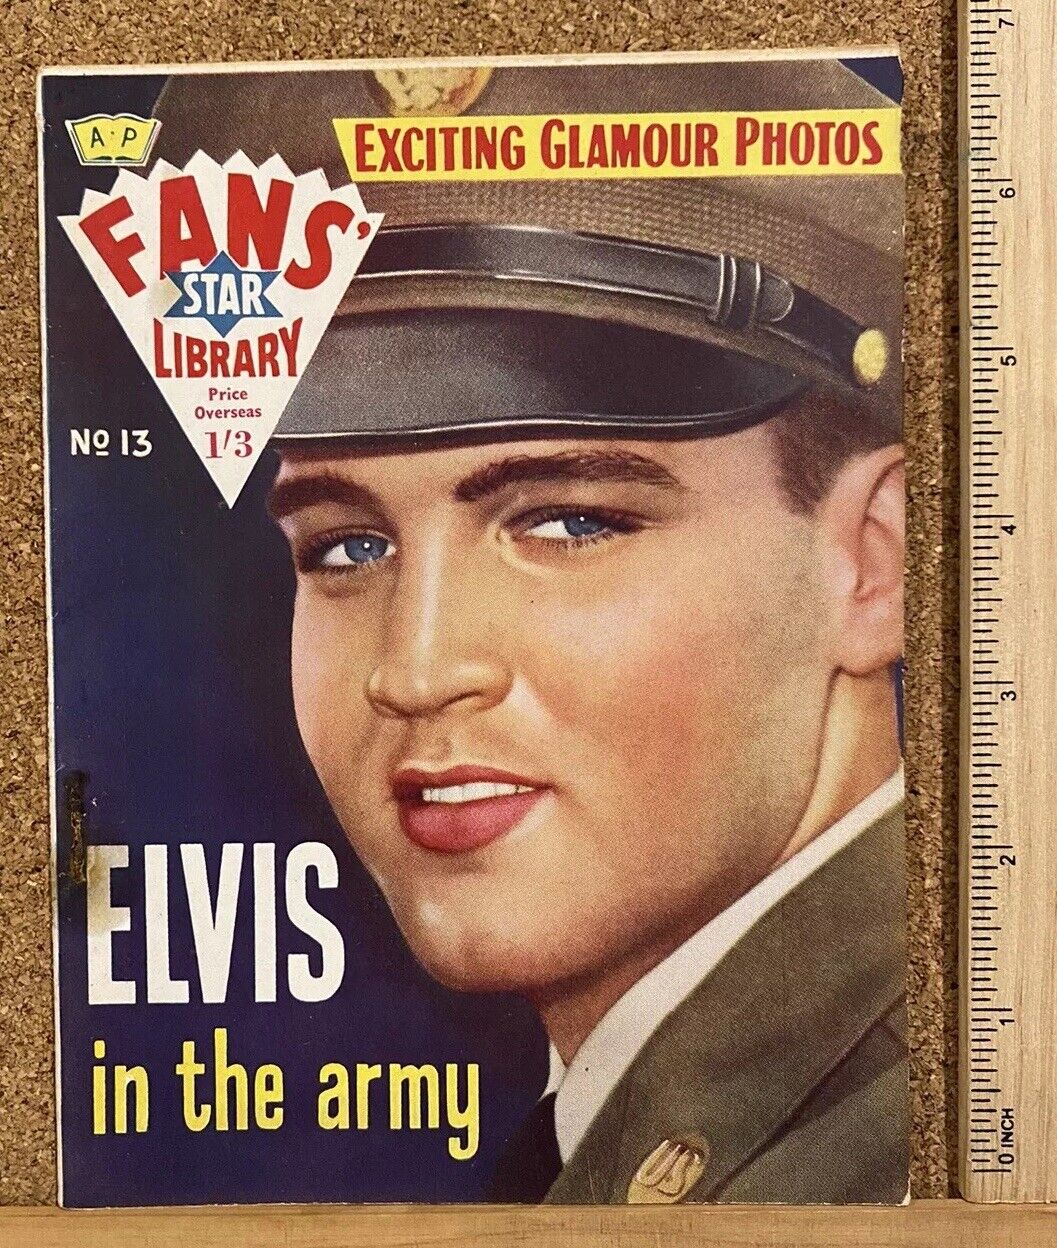 VINTAGE 1959 ELVIS PRESLEY IN THE ARMY ENGLISH FAN'S STAR LIBRARY PHOTO MAGAZINE